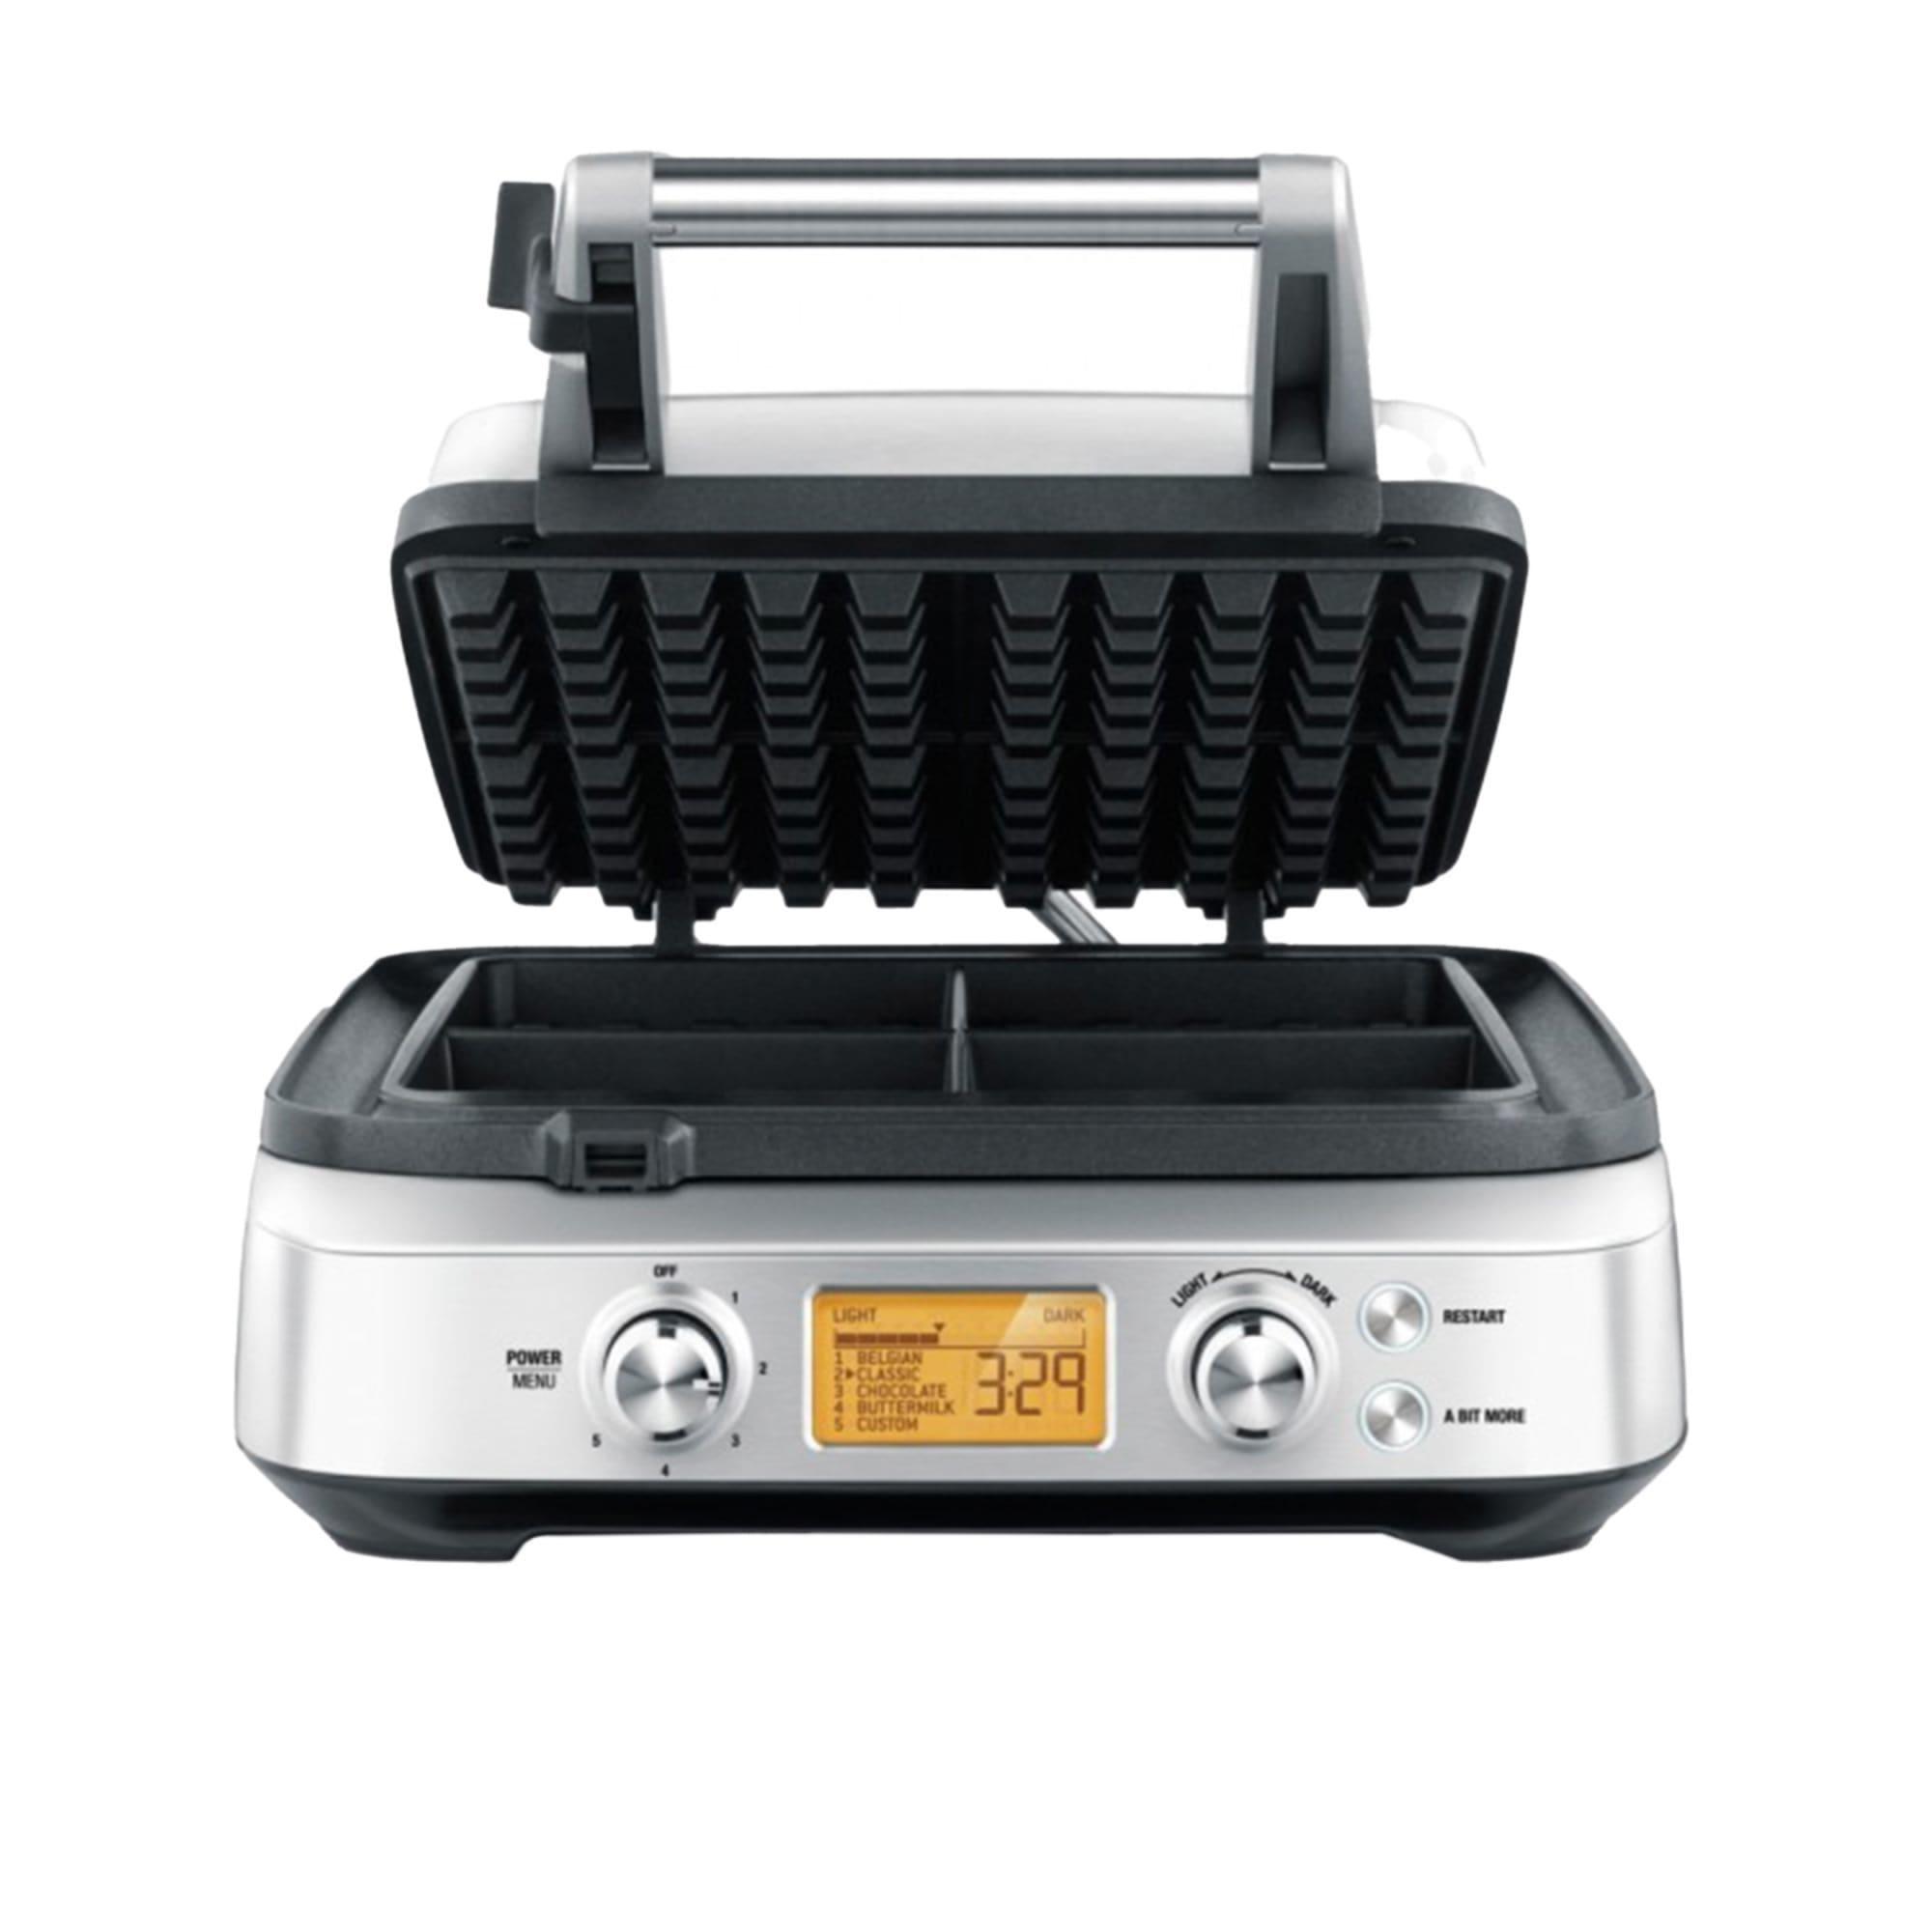 Breville The No Mess Waffle Maker Brushed Stainless Steel Image 6